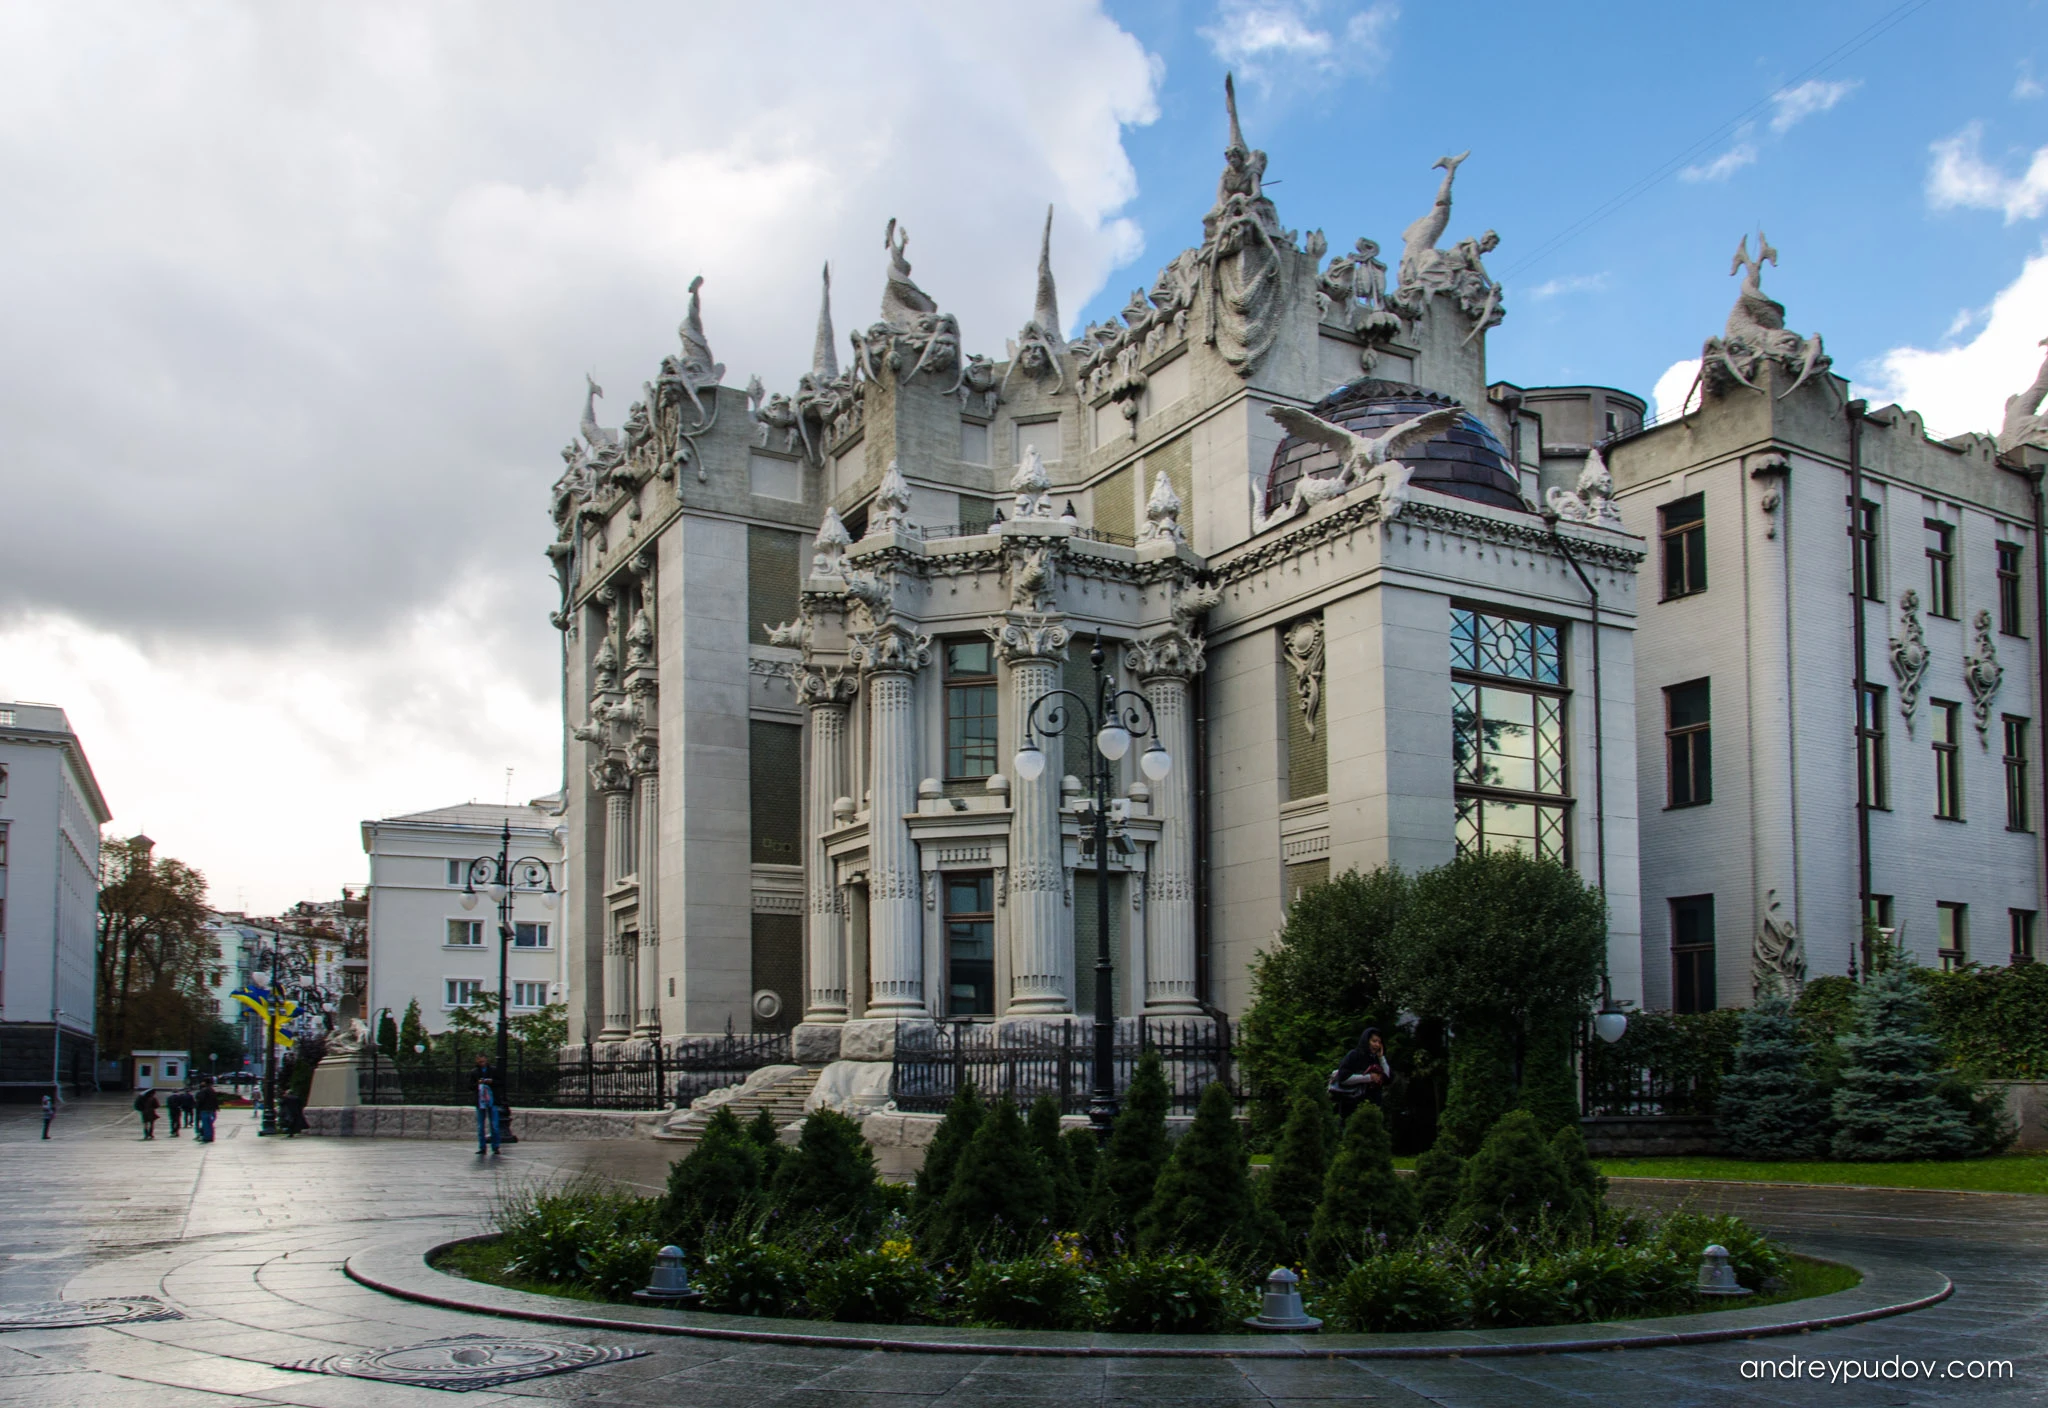 House with Chimaeras is an Art Nouveau building located in the historic Lypky neighborhood of Kyiv. The building has been used as a presidential residence for official and diplomatic ceremonies since 2005. The Polish architect Władysław Horodecki originally constructed the House with Chimaeras for use as his own upmarket apartment building during the period of 1901–1902. However, as the years went by, Horodecki eventually had to sell the building due to financial troubles, after which it changed ownership numerous times before finally being occupied by an official Communist Party polyclinic until the early 2000s. When the building was vacated, its interior and exterior decor were fully reconstructed and restored according to Horodecki's original plans.